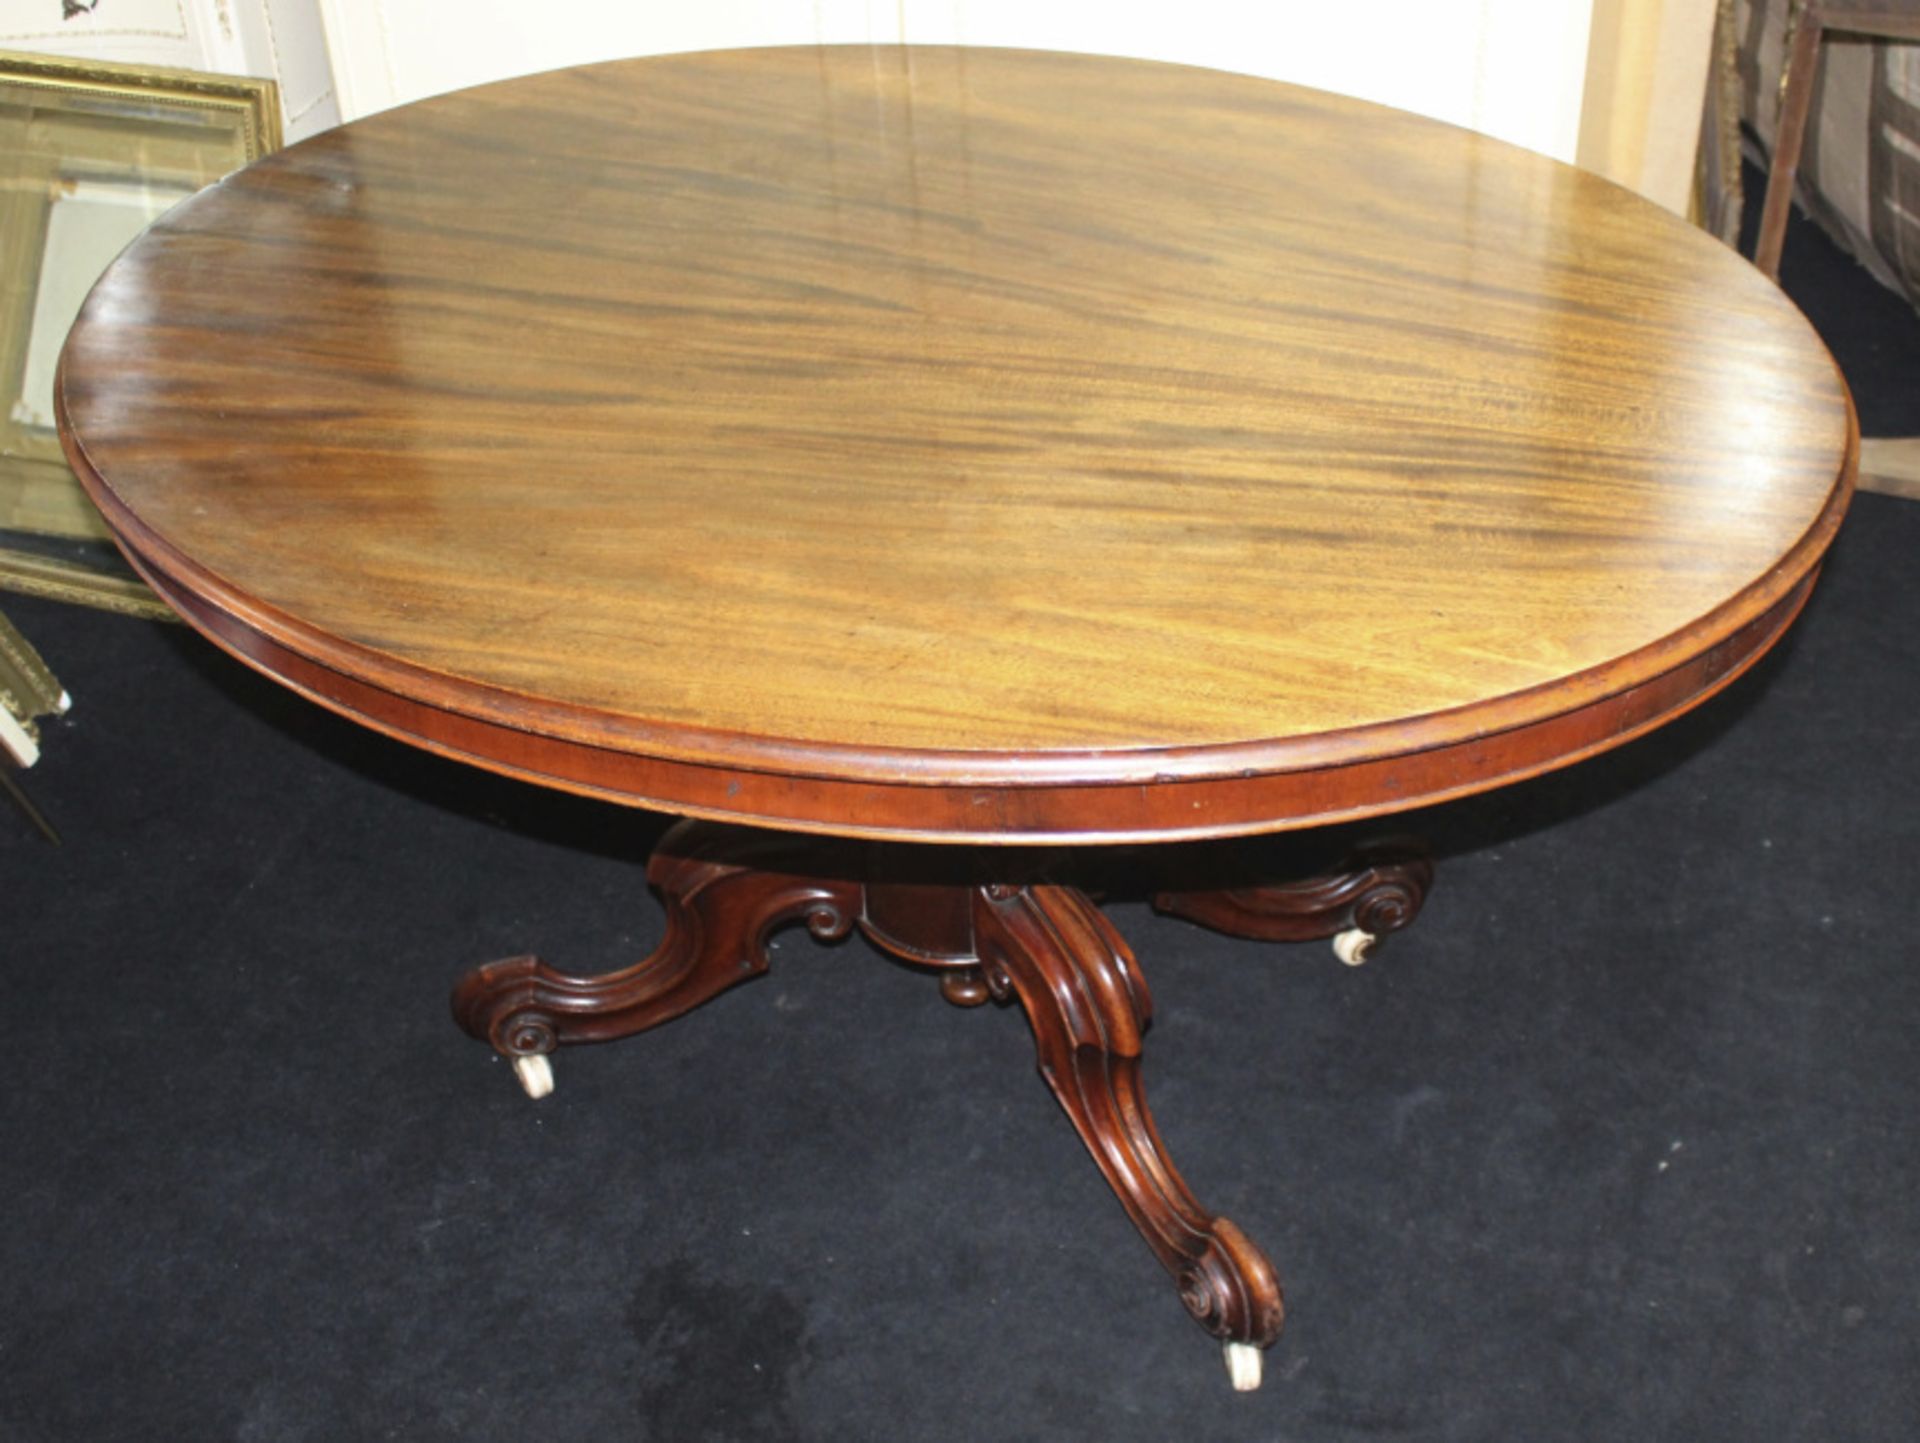 Mahogany Late 19th c. Oval Table - Image 5 of 8